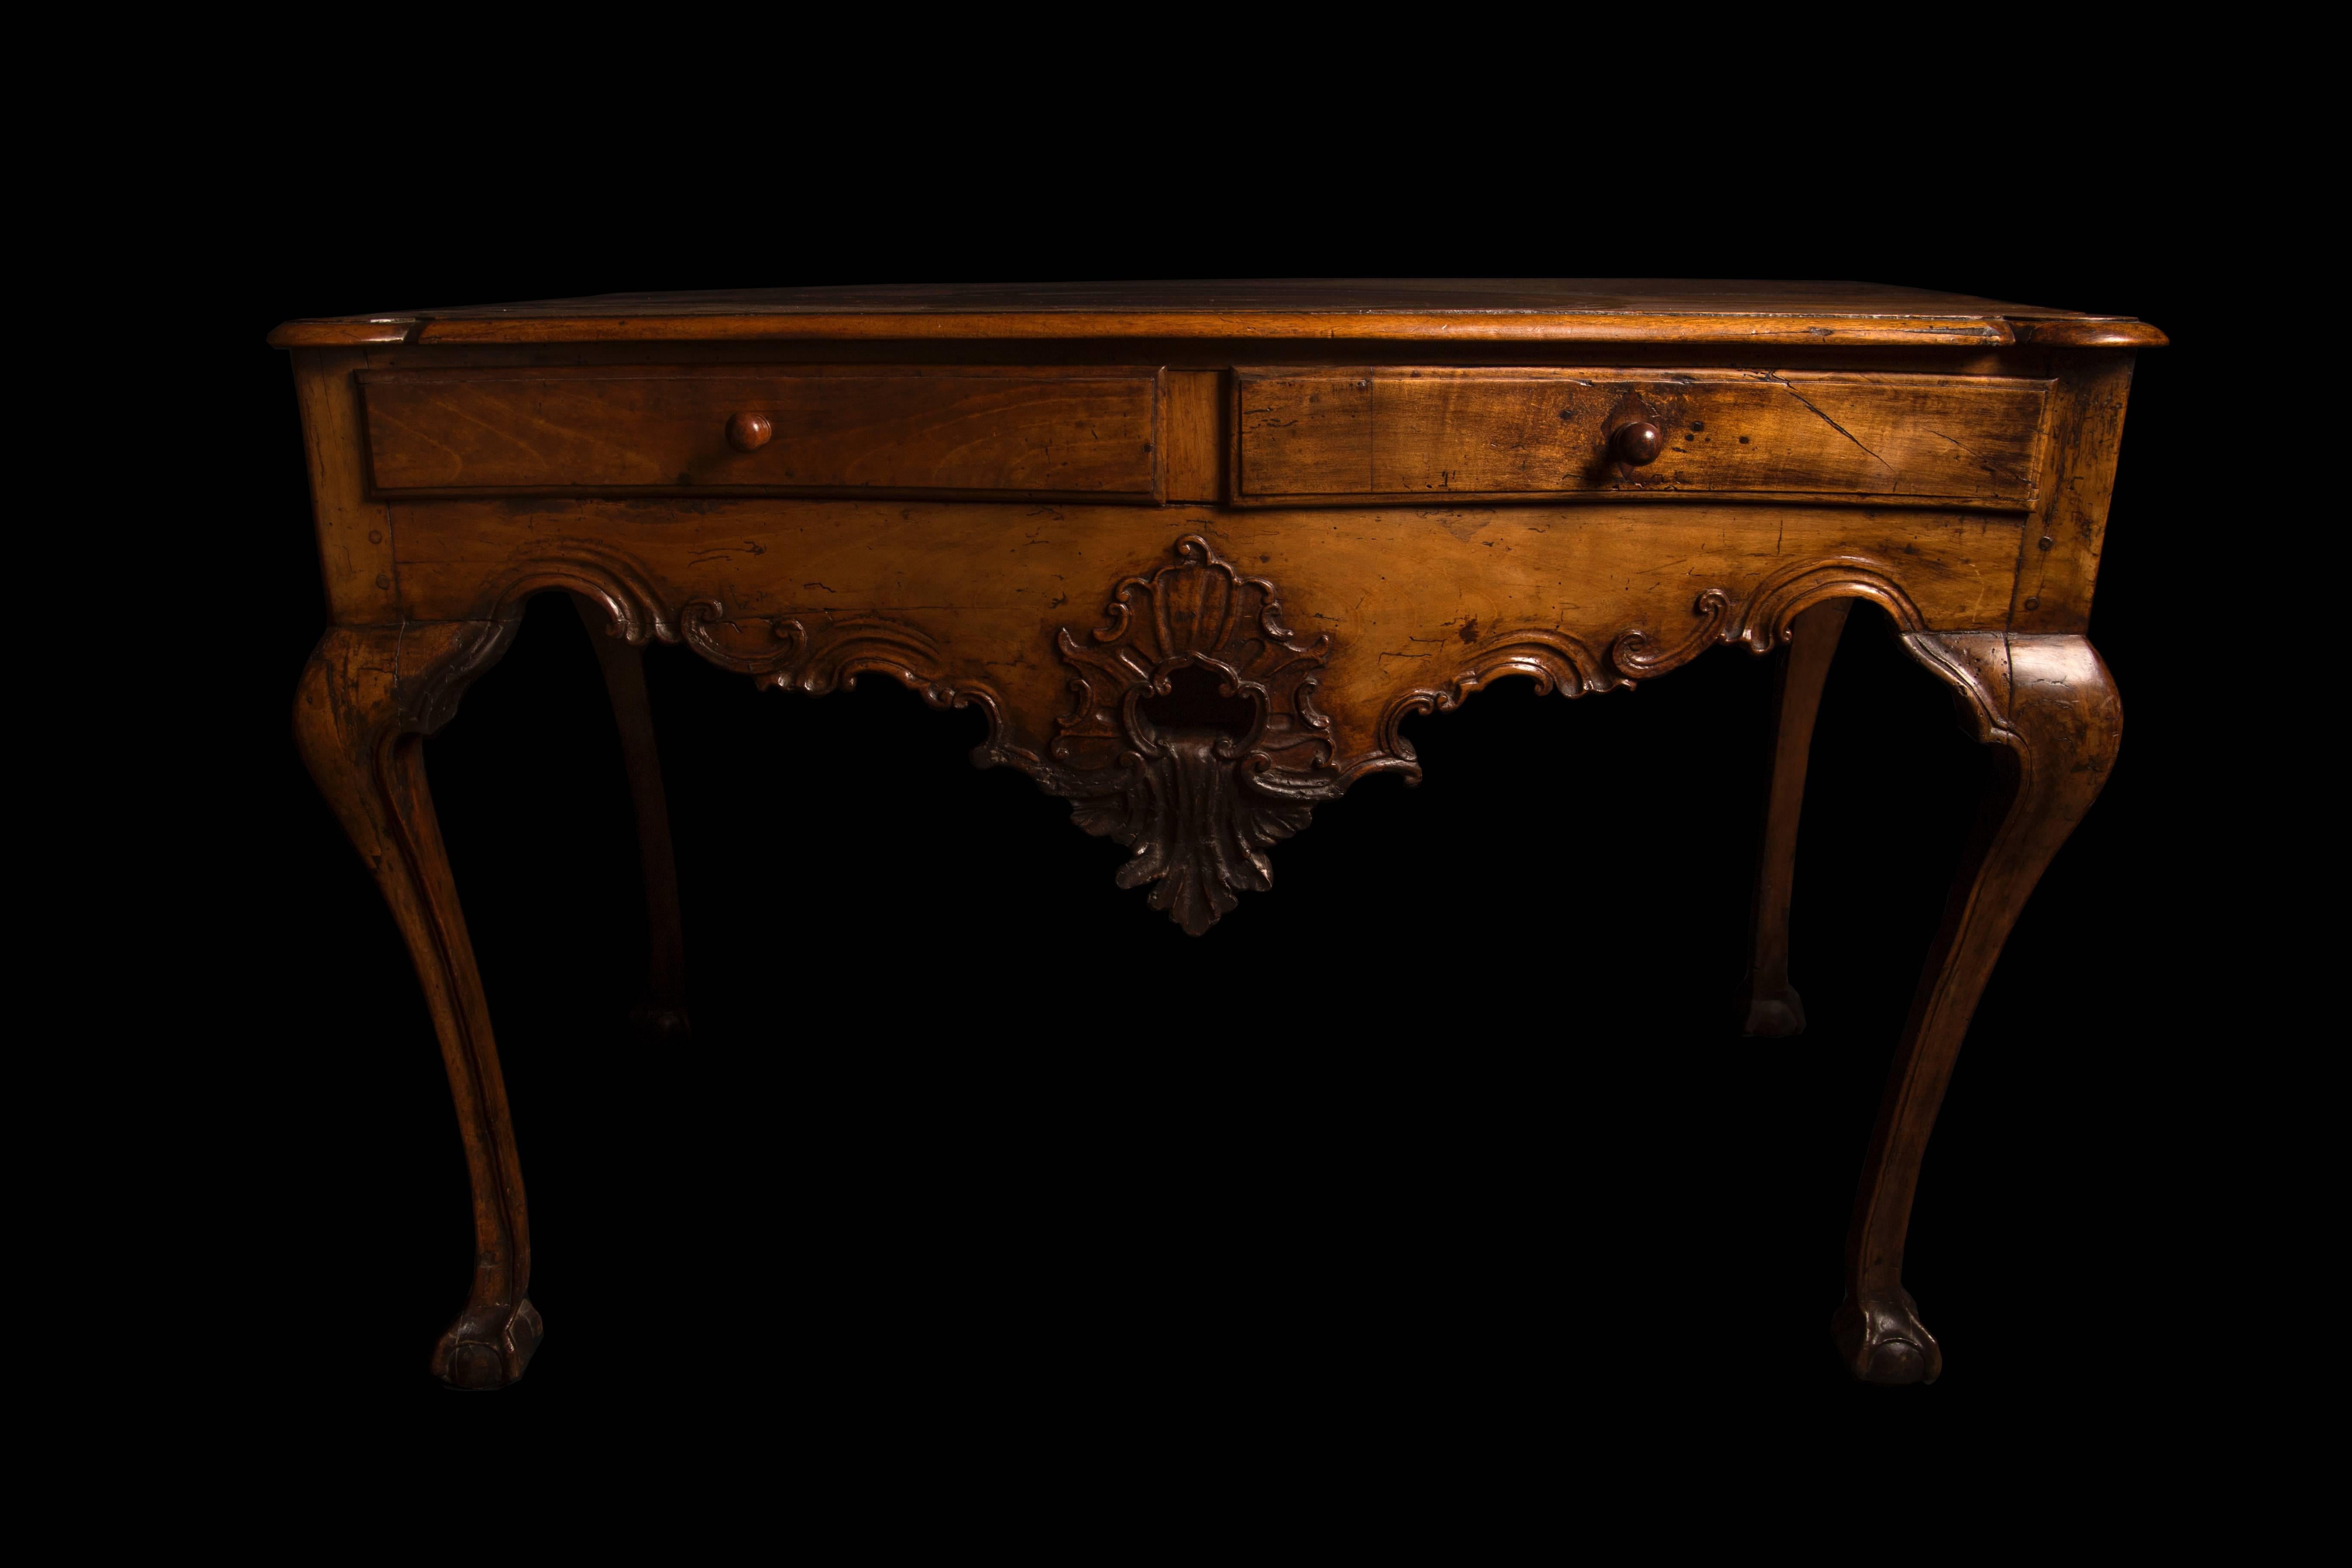 Carved João V King of Portugal, Walnut and Cherrywood Side Table / Desk, 18th Century